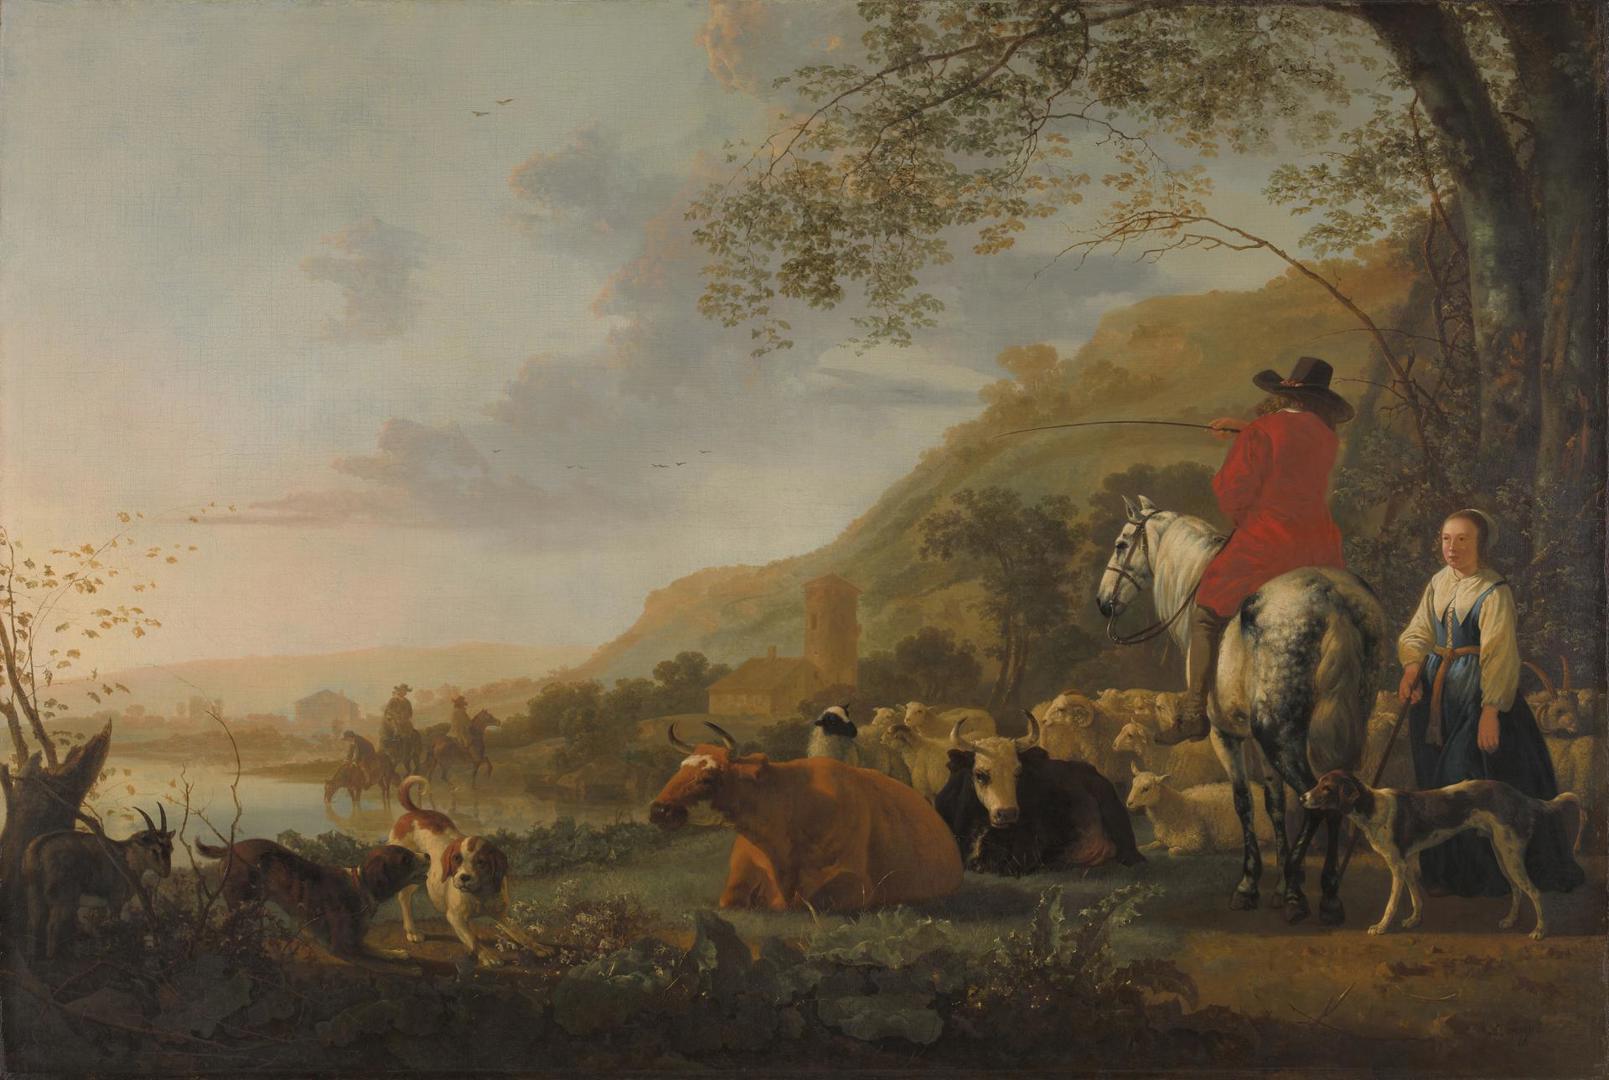 A Hilly Landscape with Figures by Aelbert Cuyp